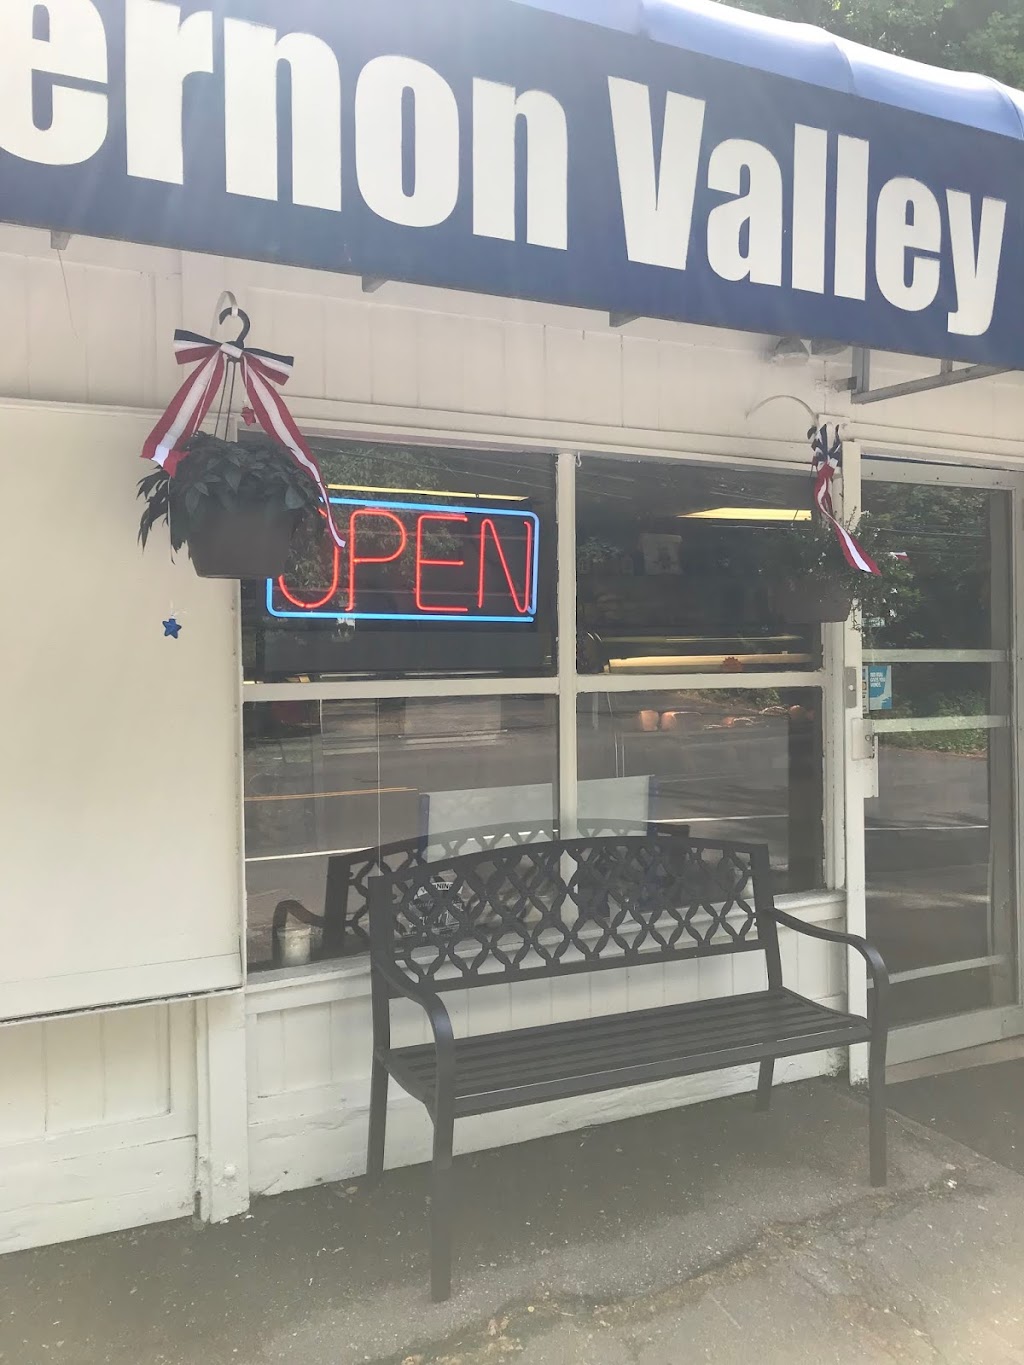 Scotts Vernon Valley Deli | 143 Vernon Valley Rd, East Northport, NY 11731 | Phone: (631) 261-1994